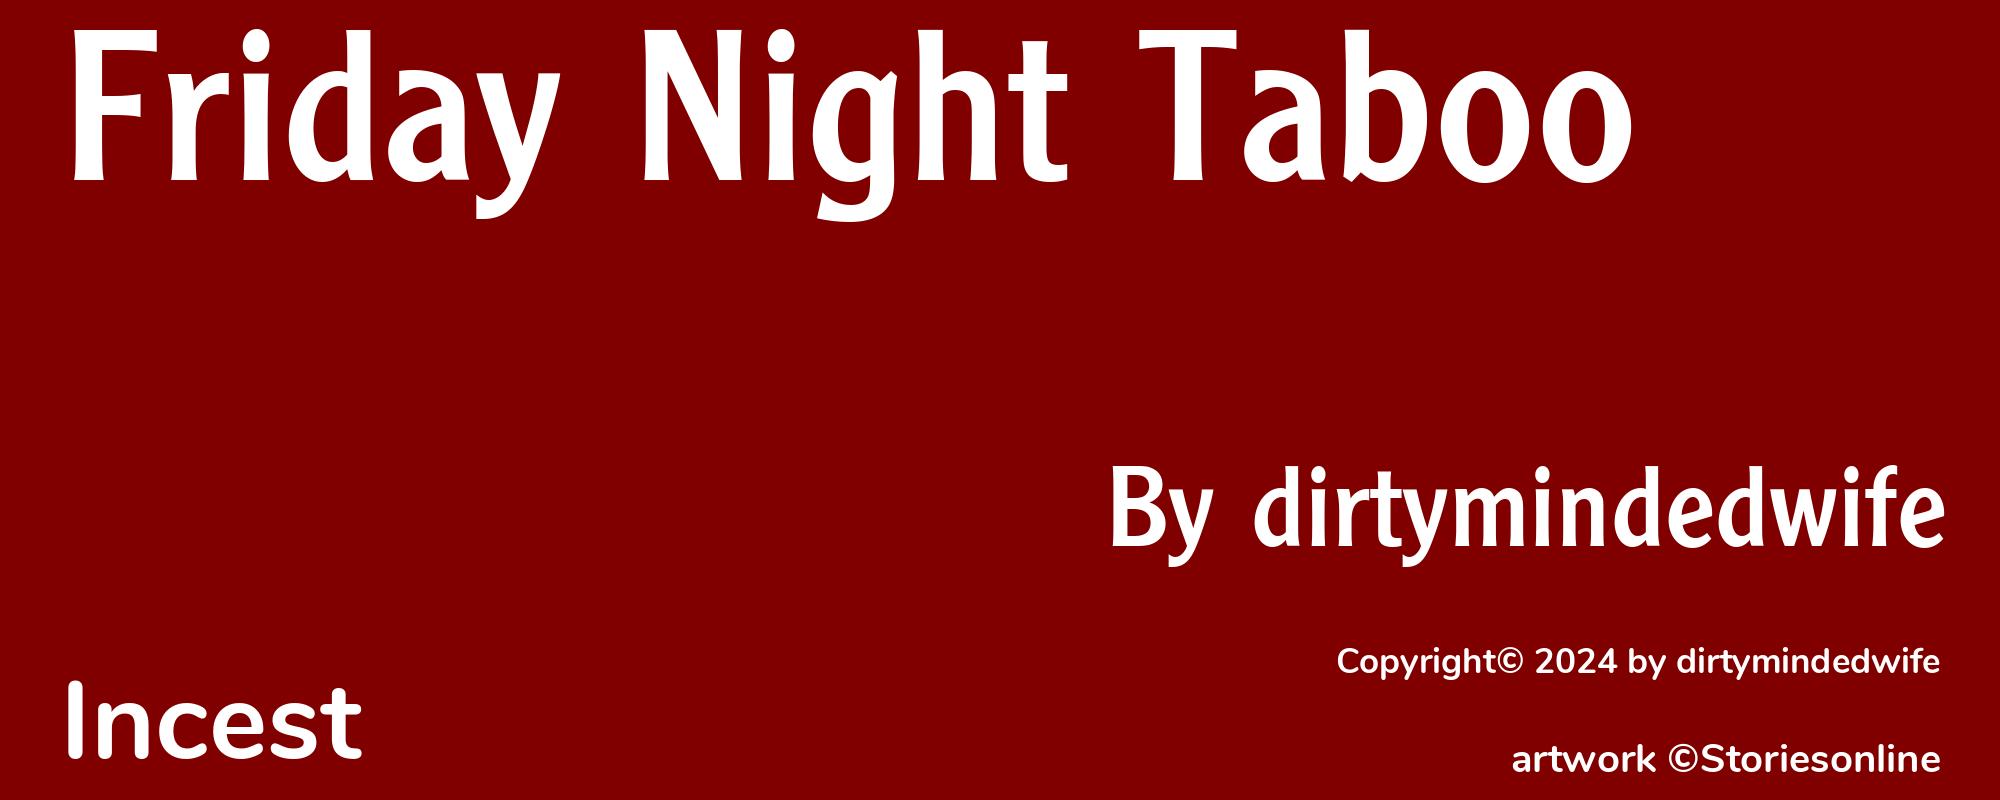 Friday Night Taboo - Cover